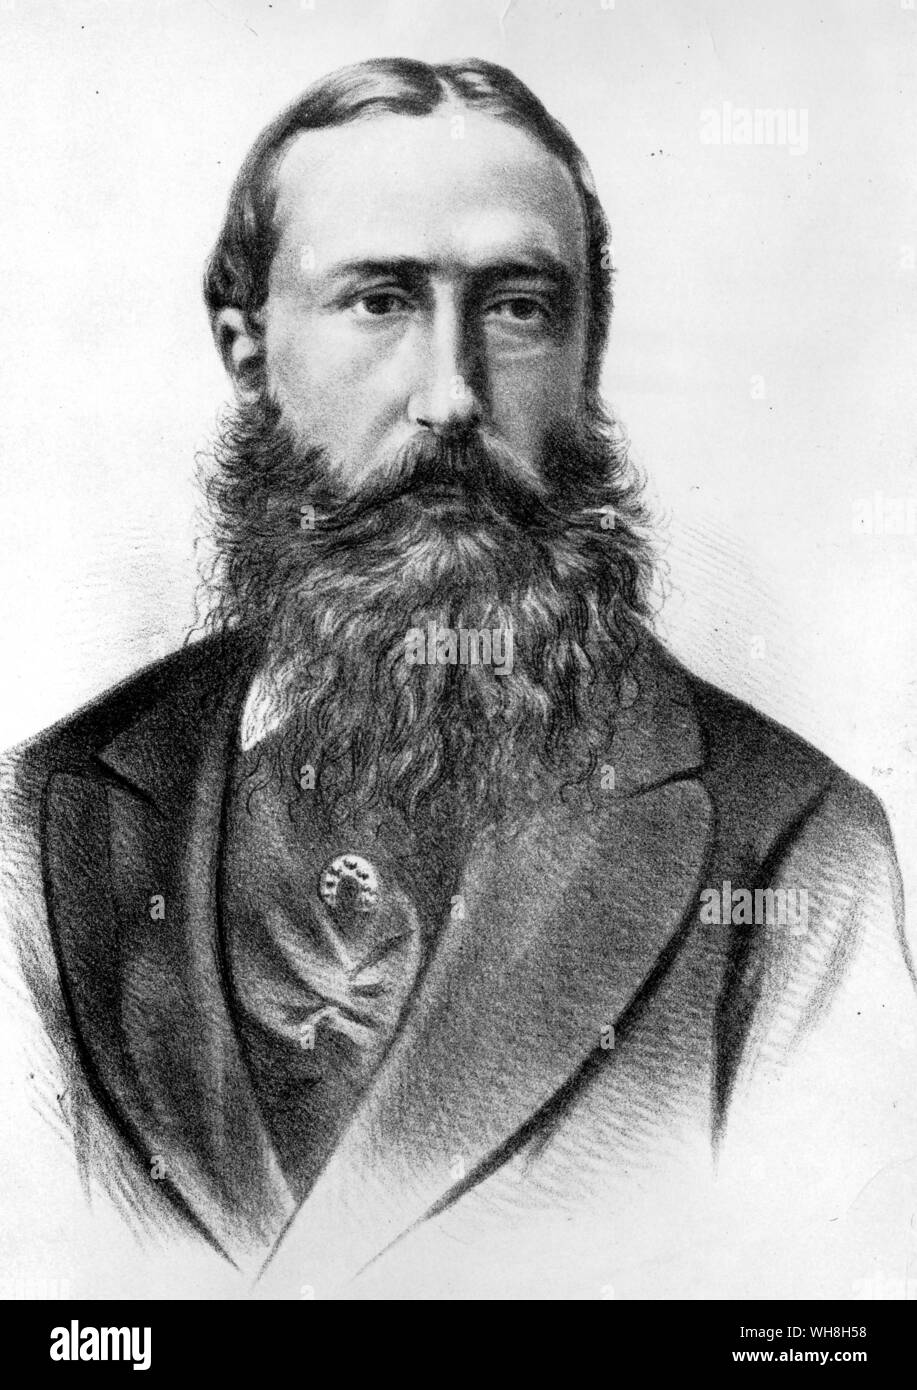 Leopold II, King of the Belgians (1835-1909). The African Adventure - A History of Africa's Explorers by Timothy Severin, page 245. Stock Photo